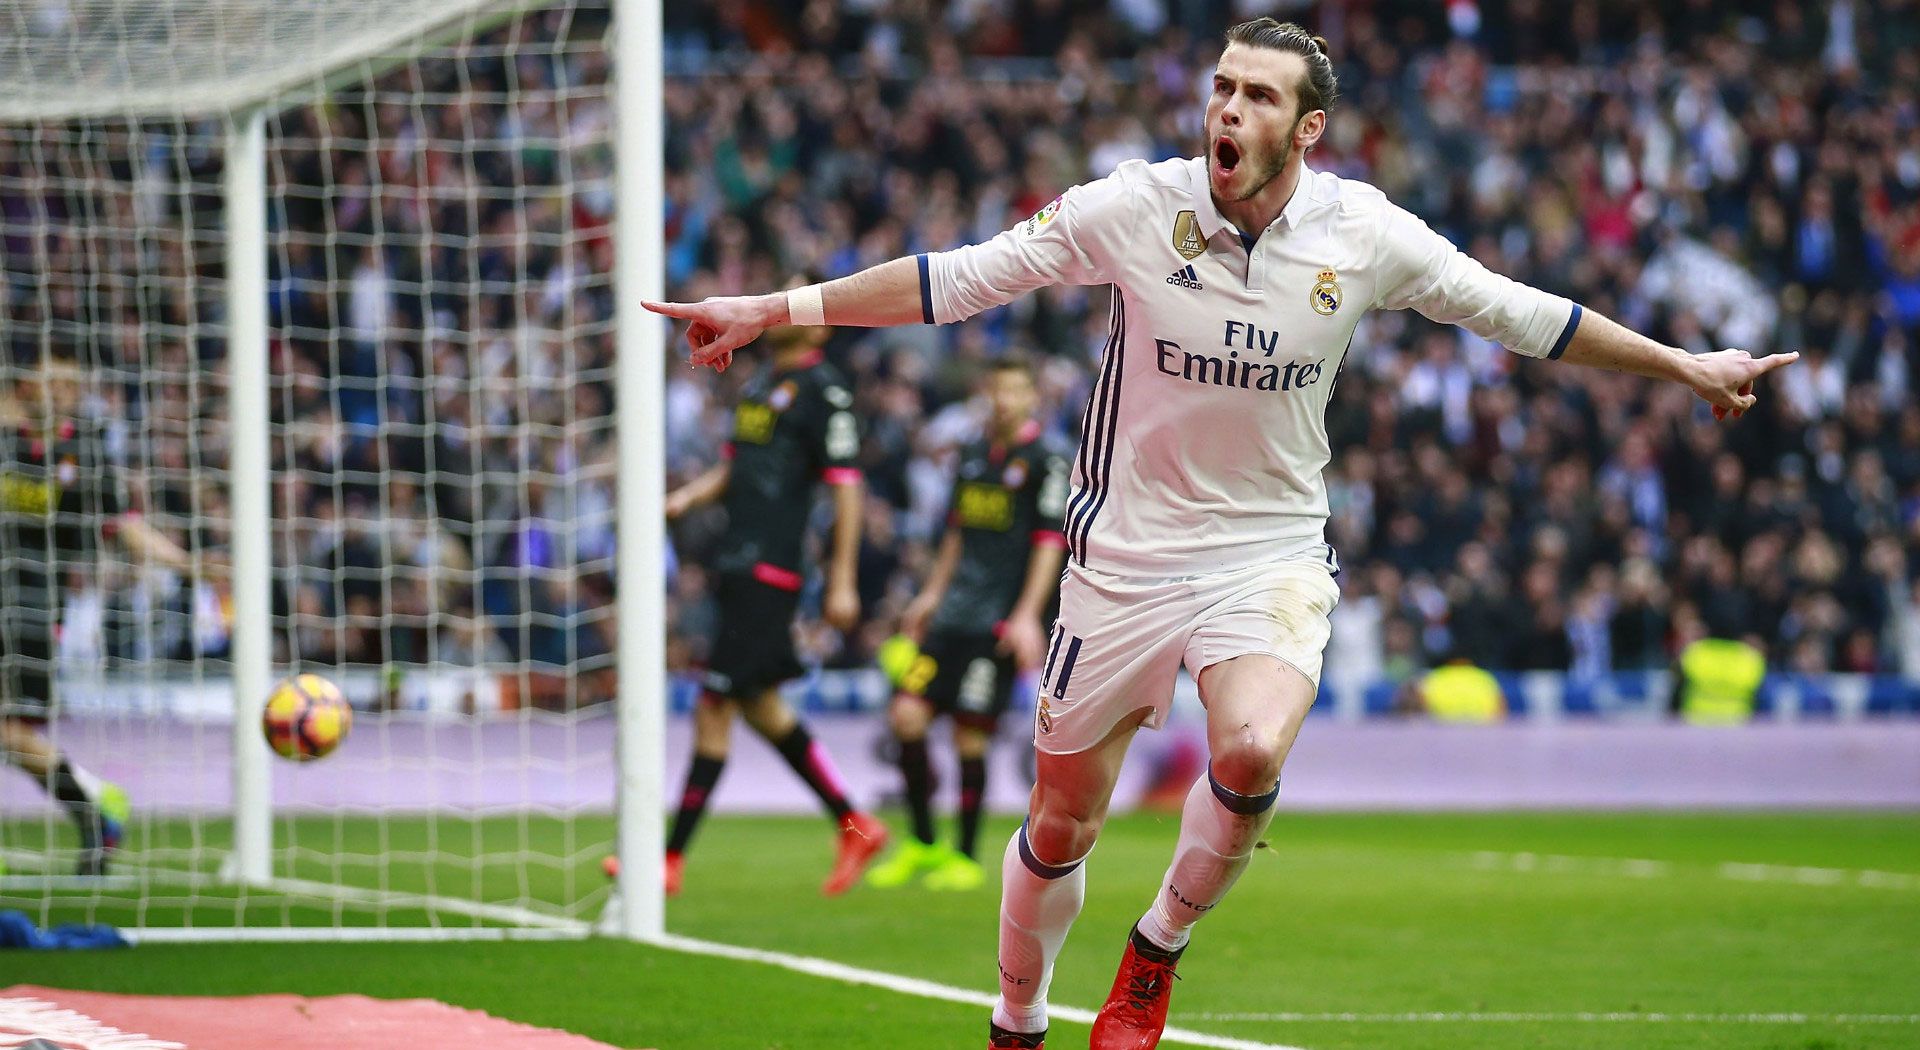 Latest Gareth Bale HD Wallpapers Images Photos 2018 Free Download